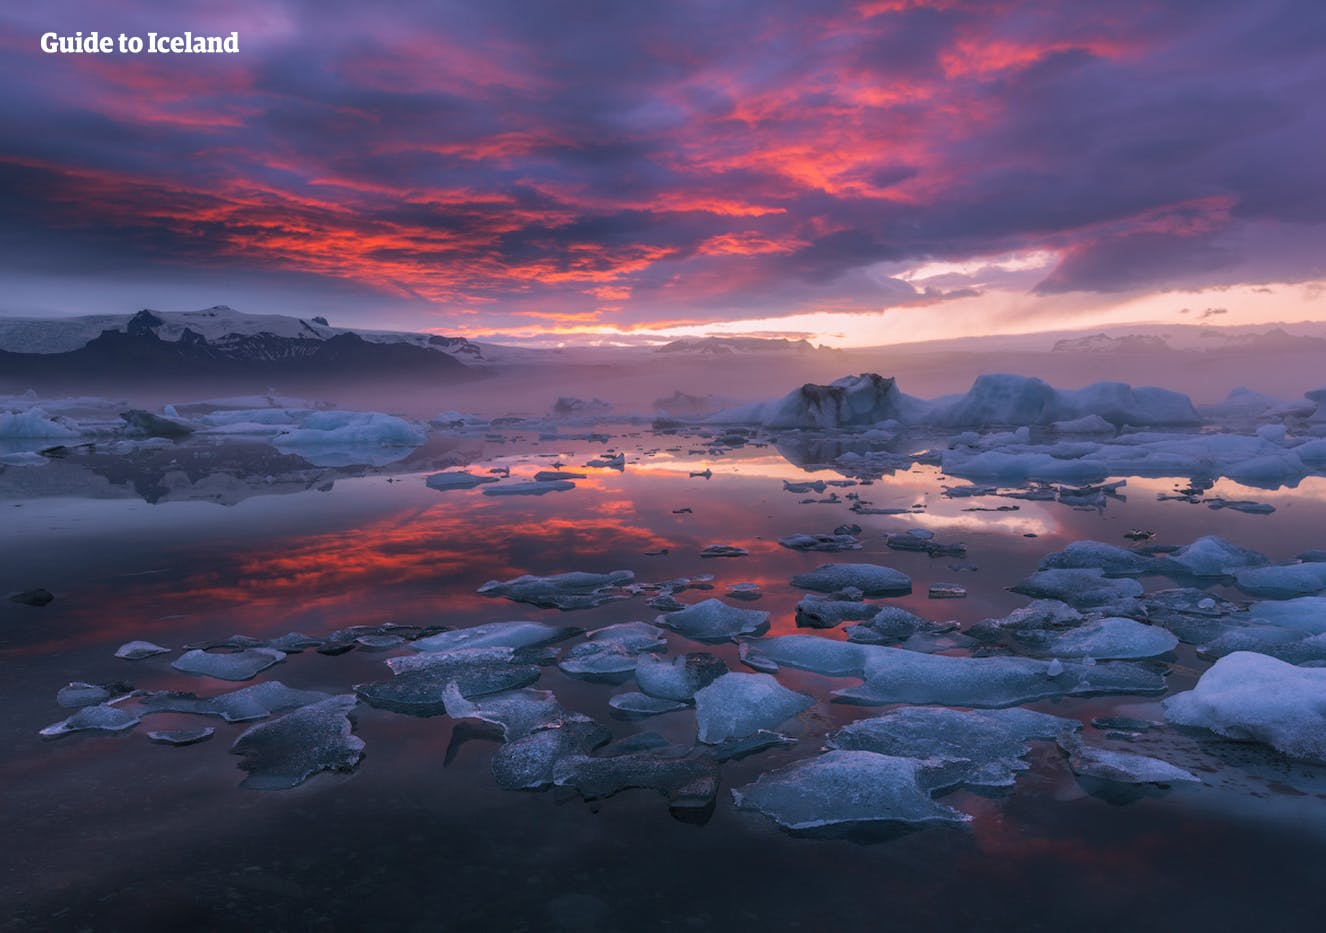 Visit the beautiful Jökulsárlón glacier lagoon on a summer self-drive tour, and witness icebergs floating peacefully on the freezing water.